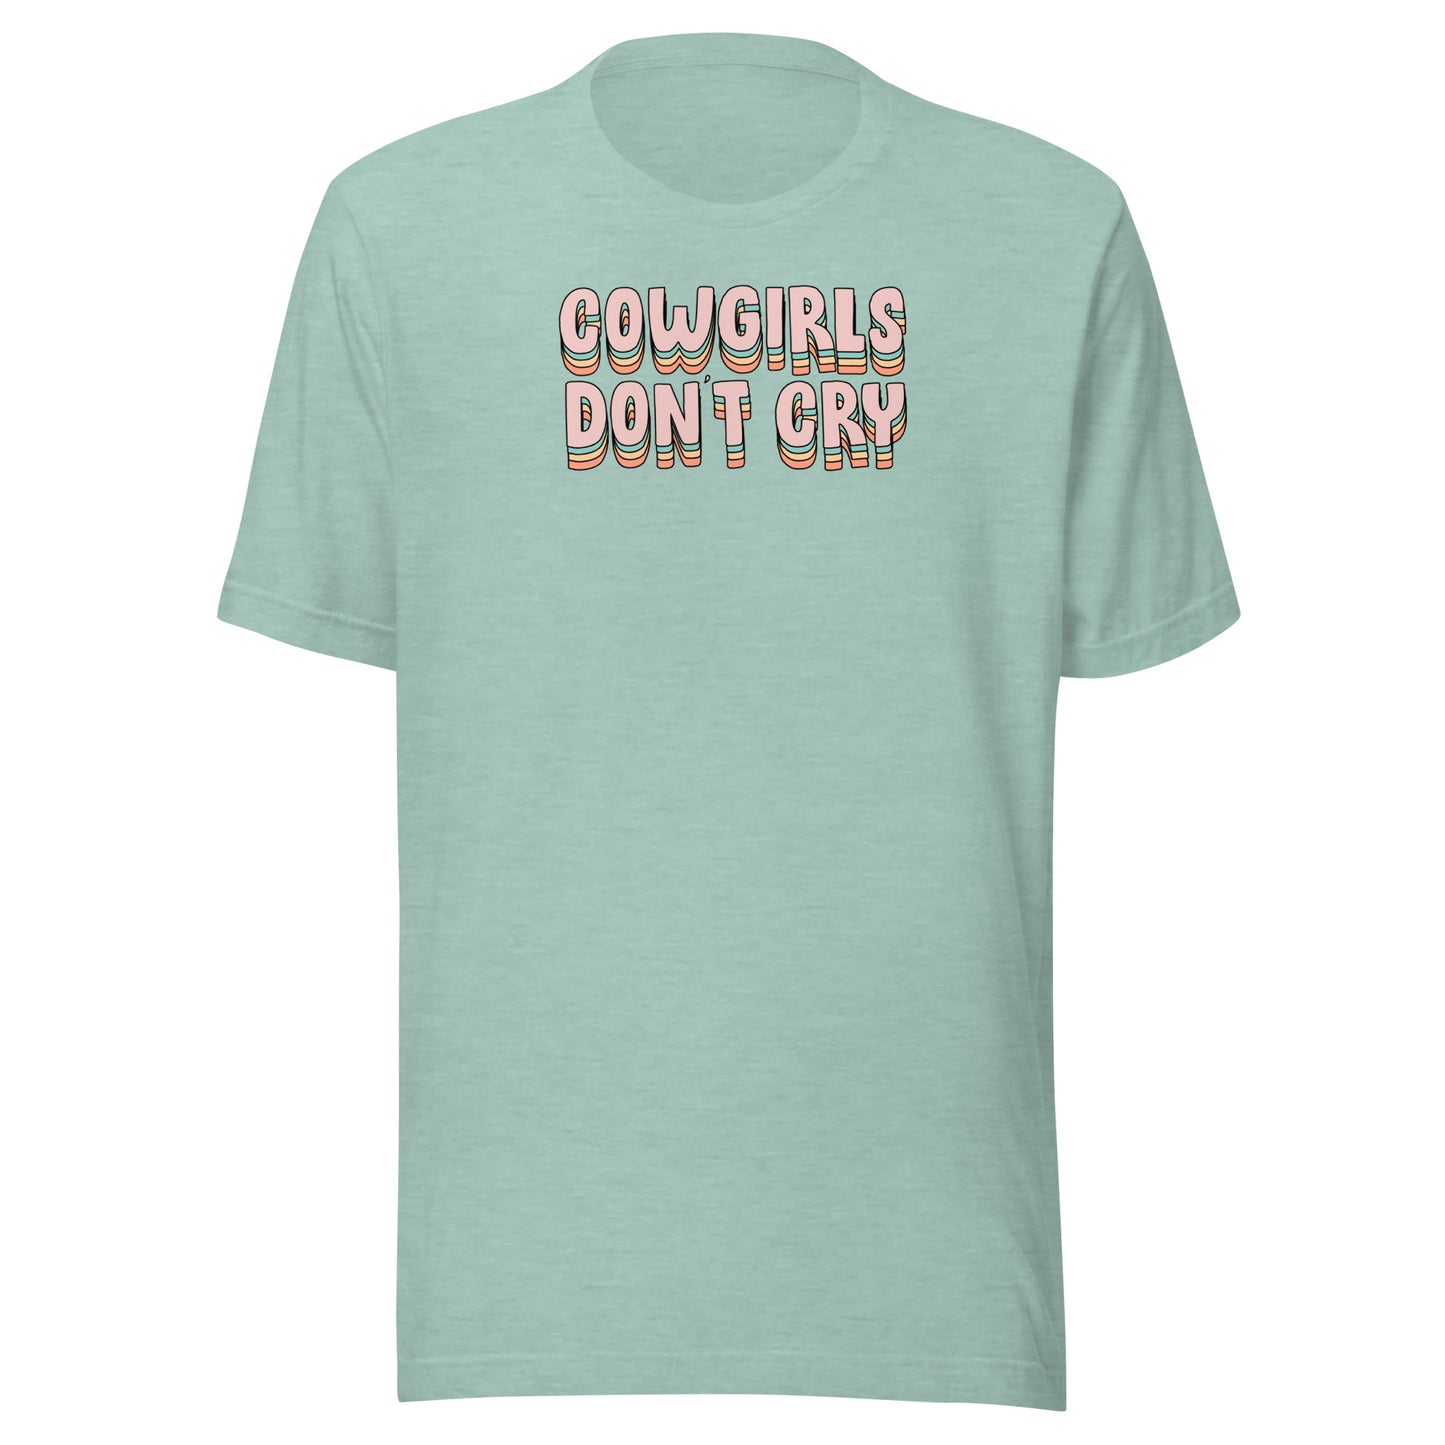 T-Shirt - Cowgirls Don't Cry